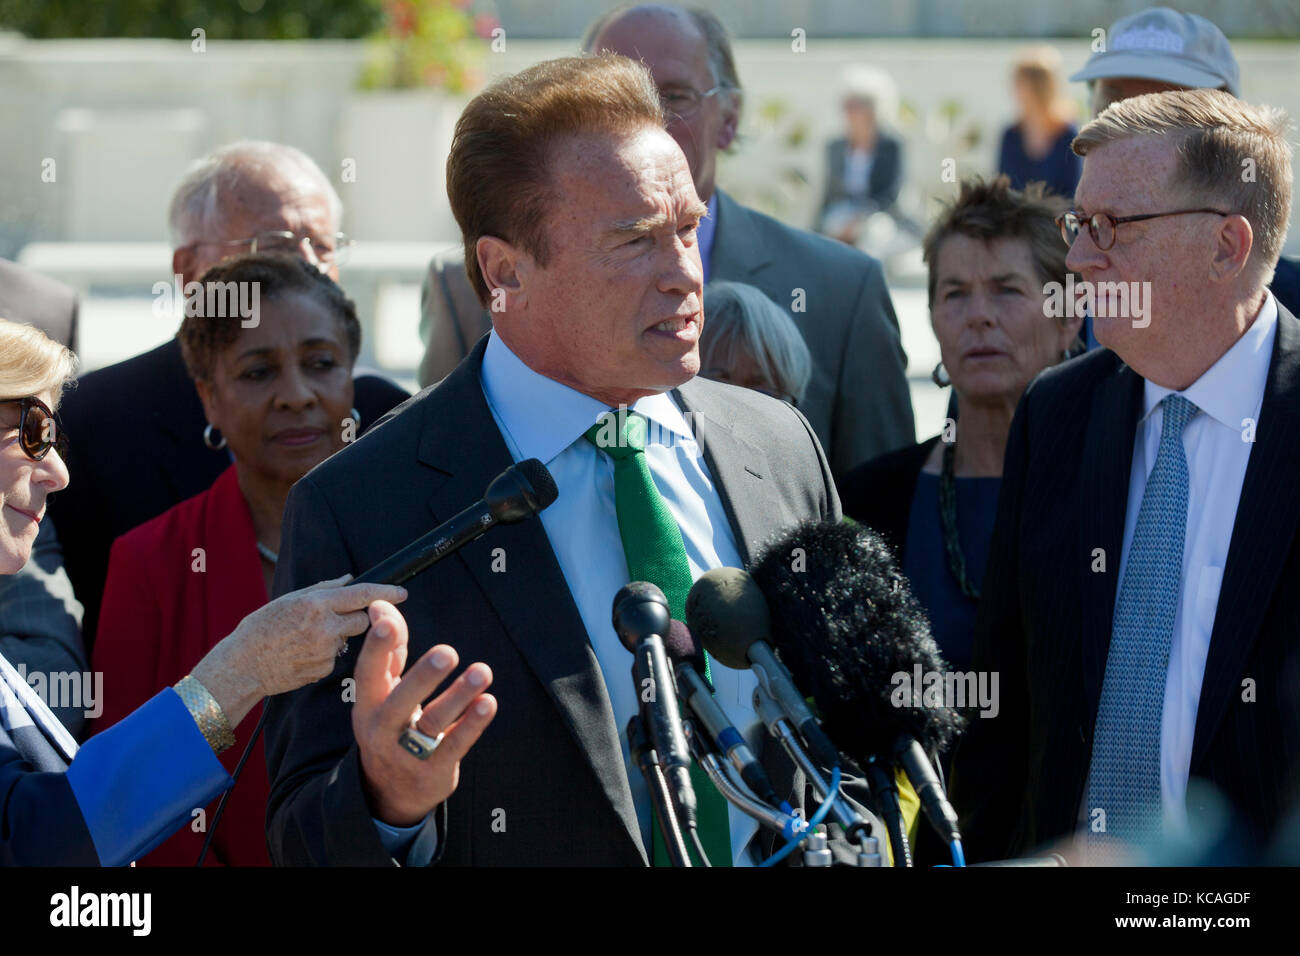 Washington, USA. 3rd Oct, 2017. Arnold Schwarzenegger, former movie-star and governor of California, speaks against partisan drawing of voting districts, while the US Supreme Court Justices hear oral arguments on gerrymandering case. Credit: B Christopher/Alamy Live News Stock Photo